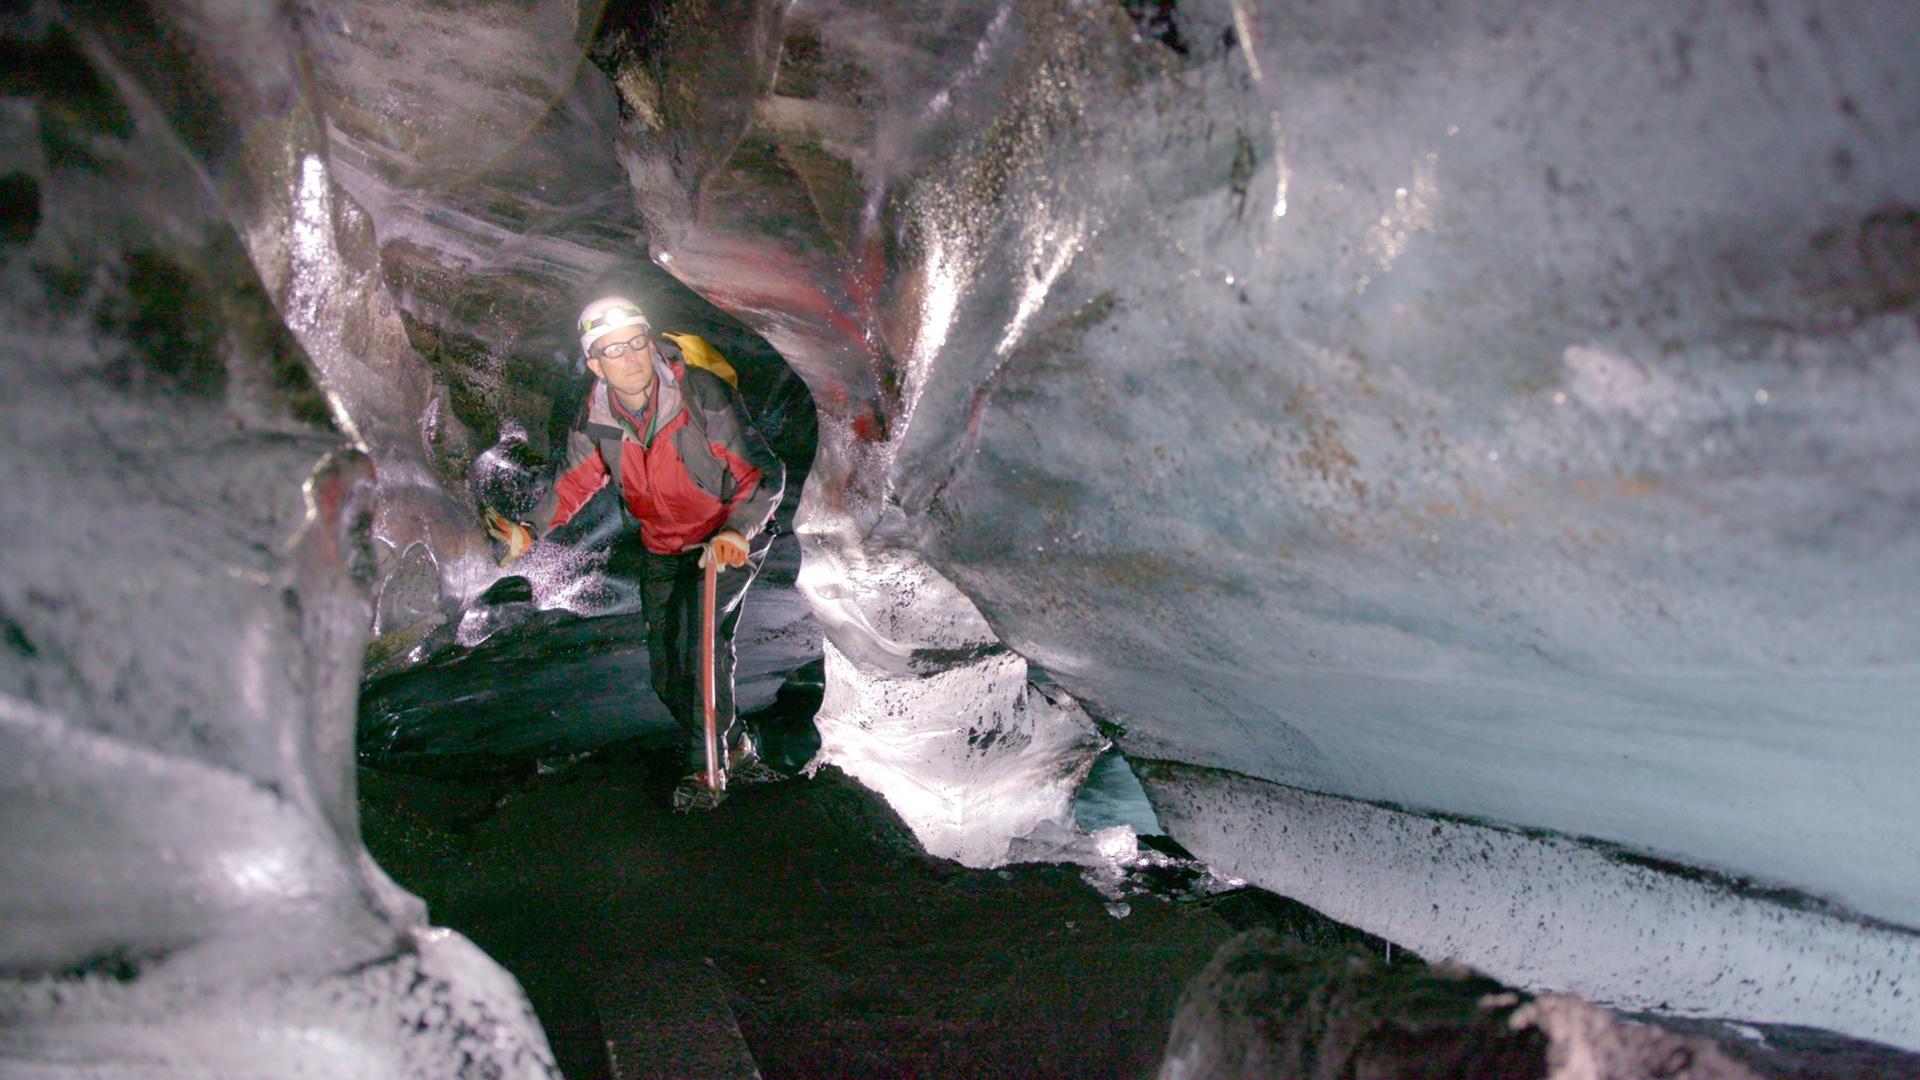 Geologist Stephen Mojzsis explores an ice cave. Stephen says, "life has perpetuated the liquid water on the surface of our planet, for geologic time".